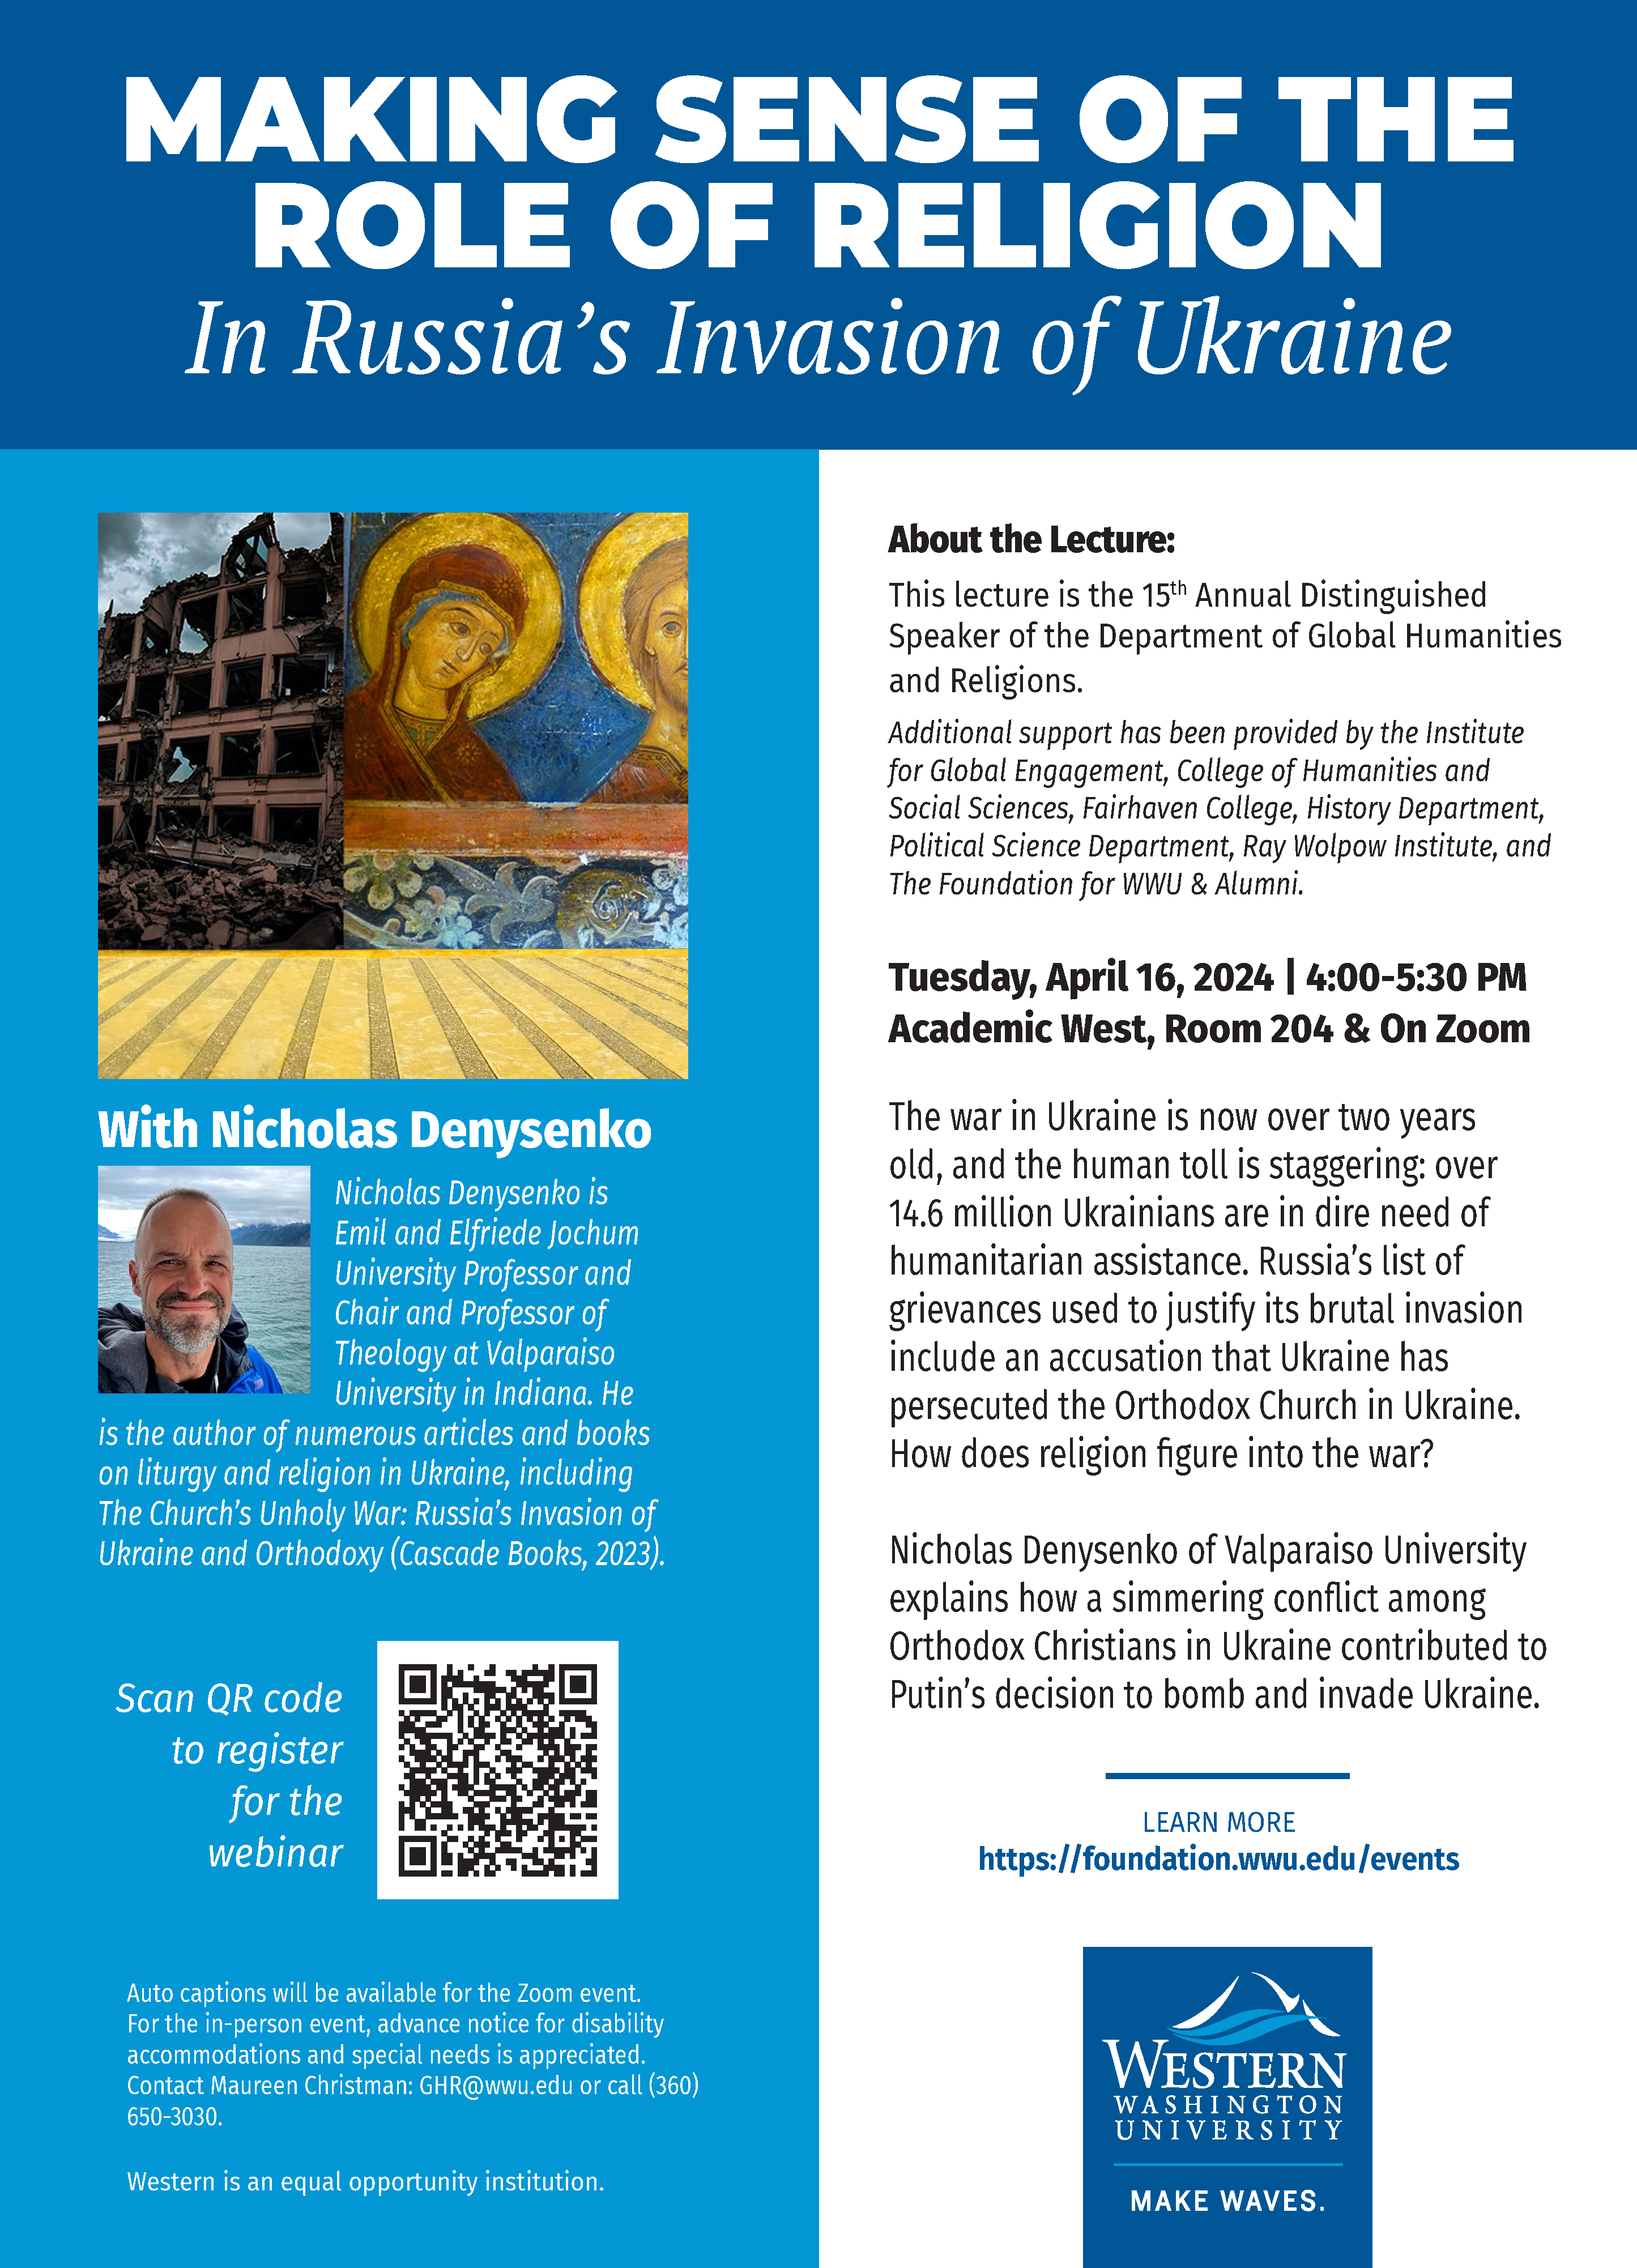 Making Sense of the Role of Religion in Russia's Invasion of Ukraine Flyer Image